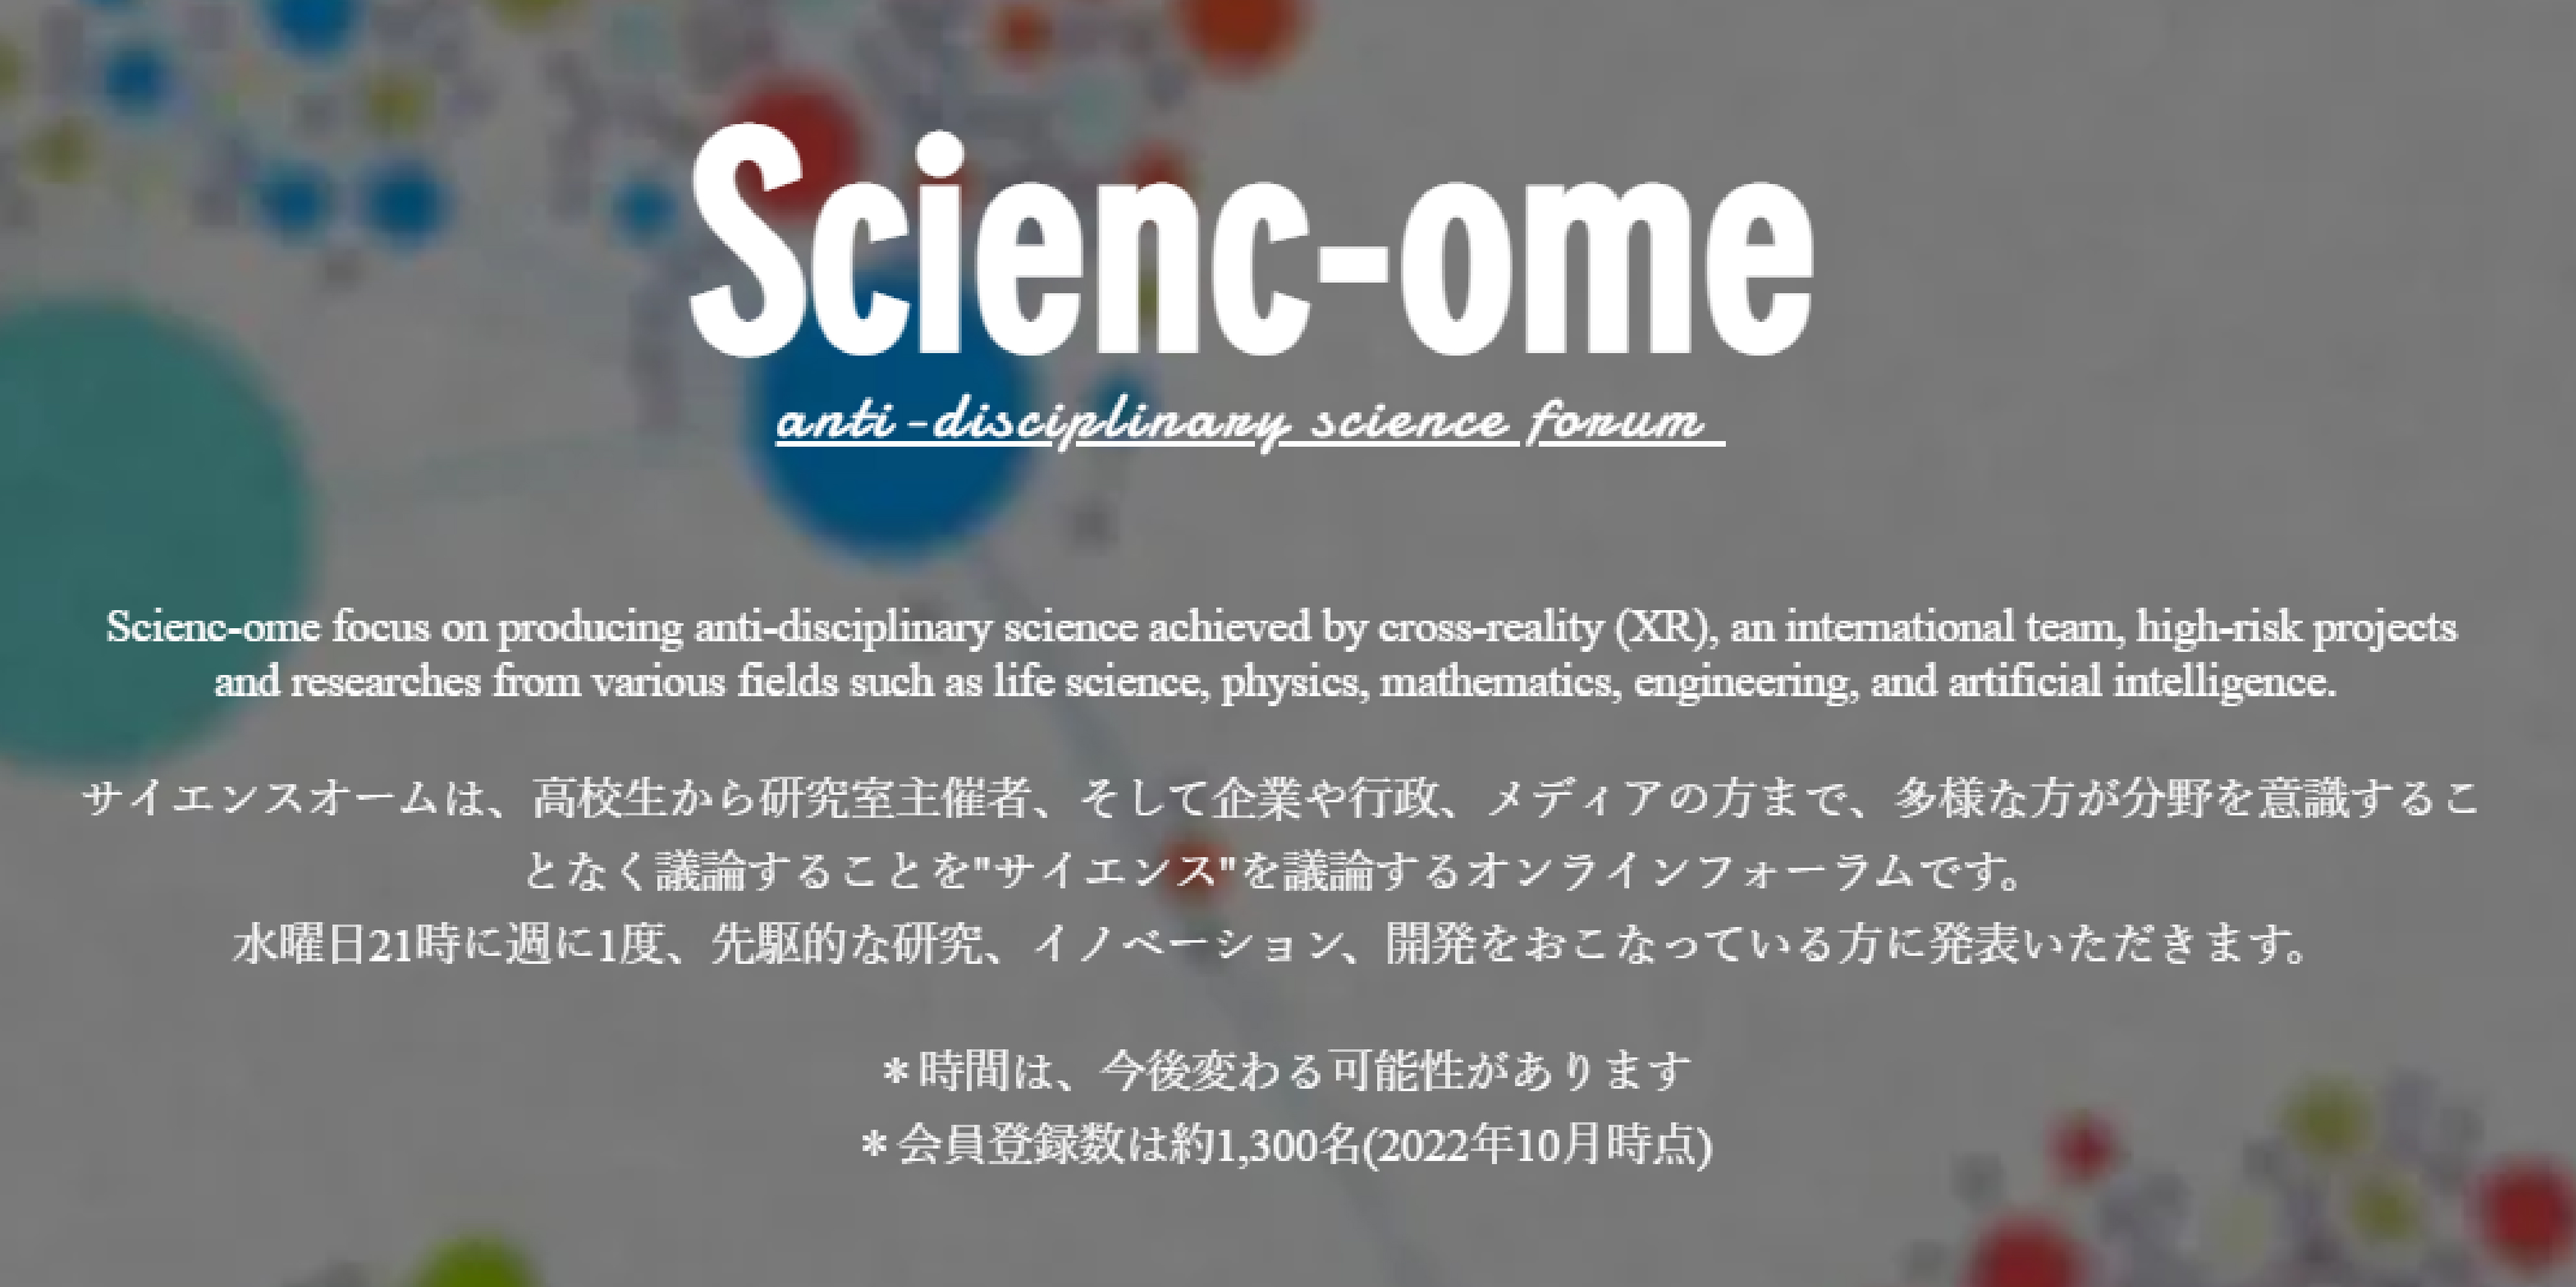 Scienc-ome_アートボード 1.jpg